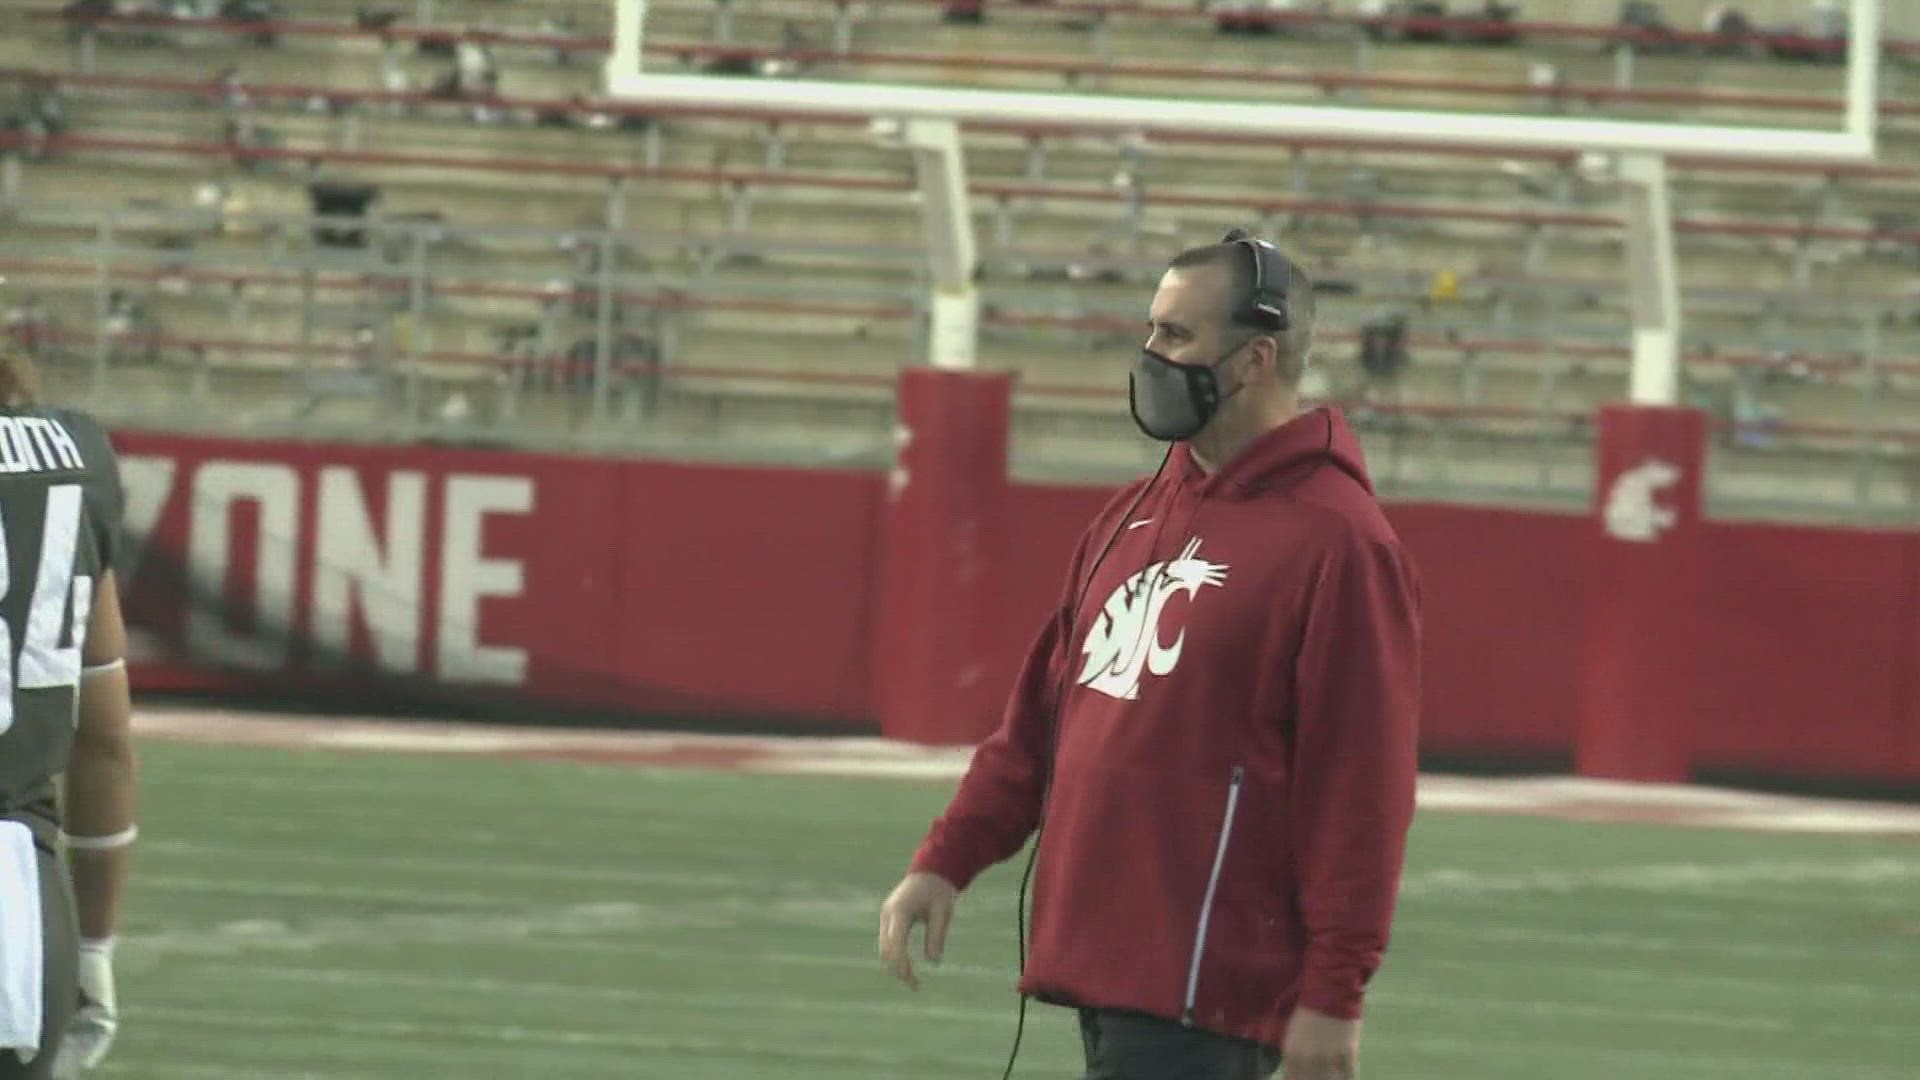 The former WSU coach was fired for not complying with the university's COVID-19 vaccination policy. KREM 2 learned Friday that Rolovich has now filed a tort suit.